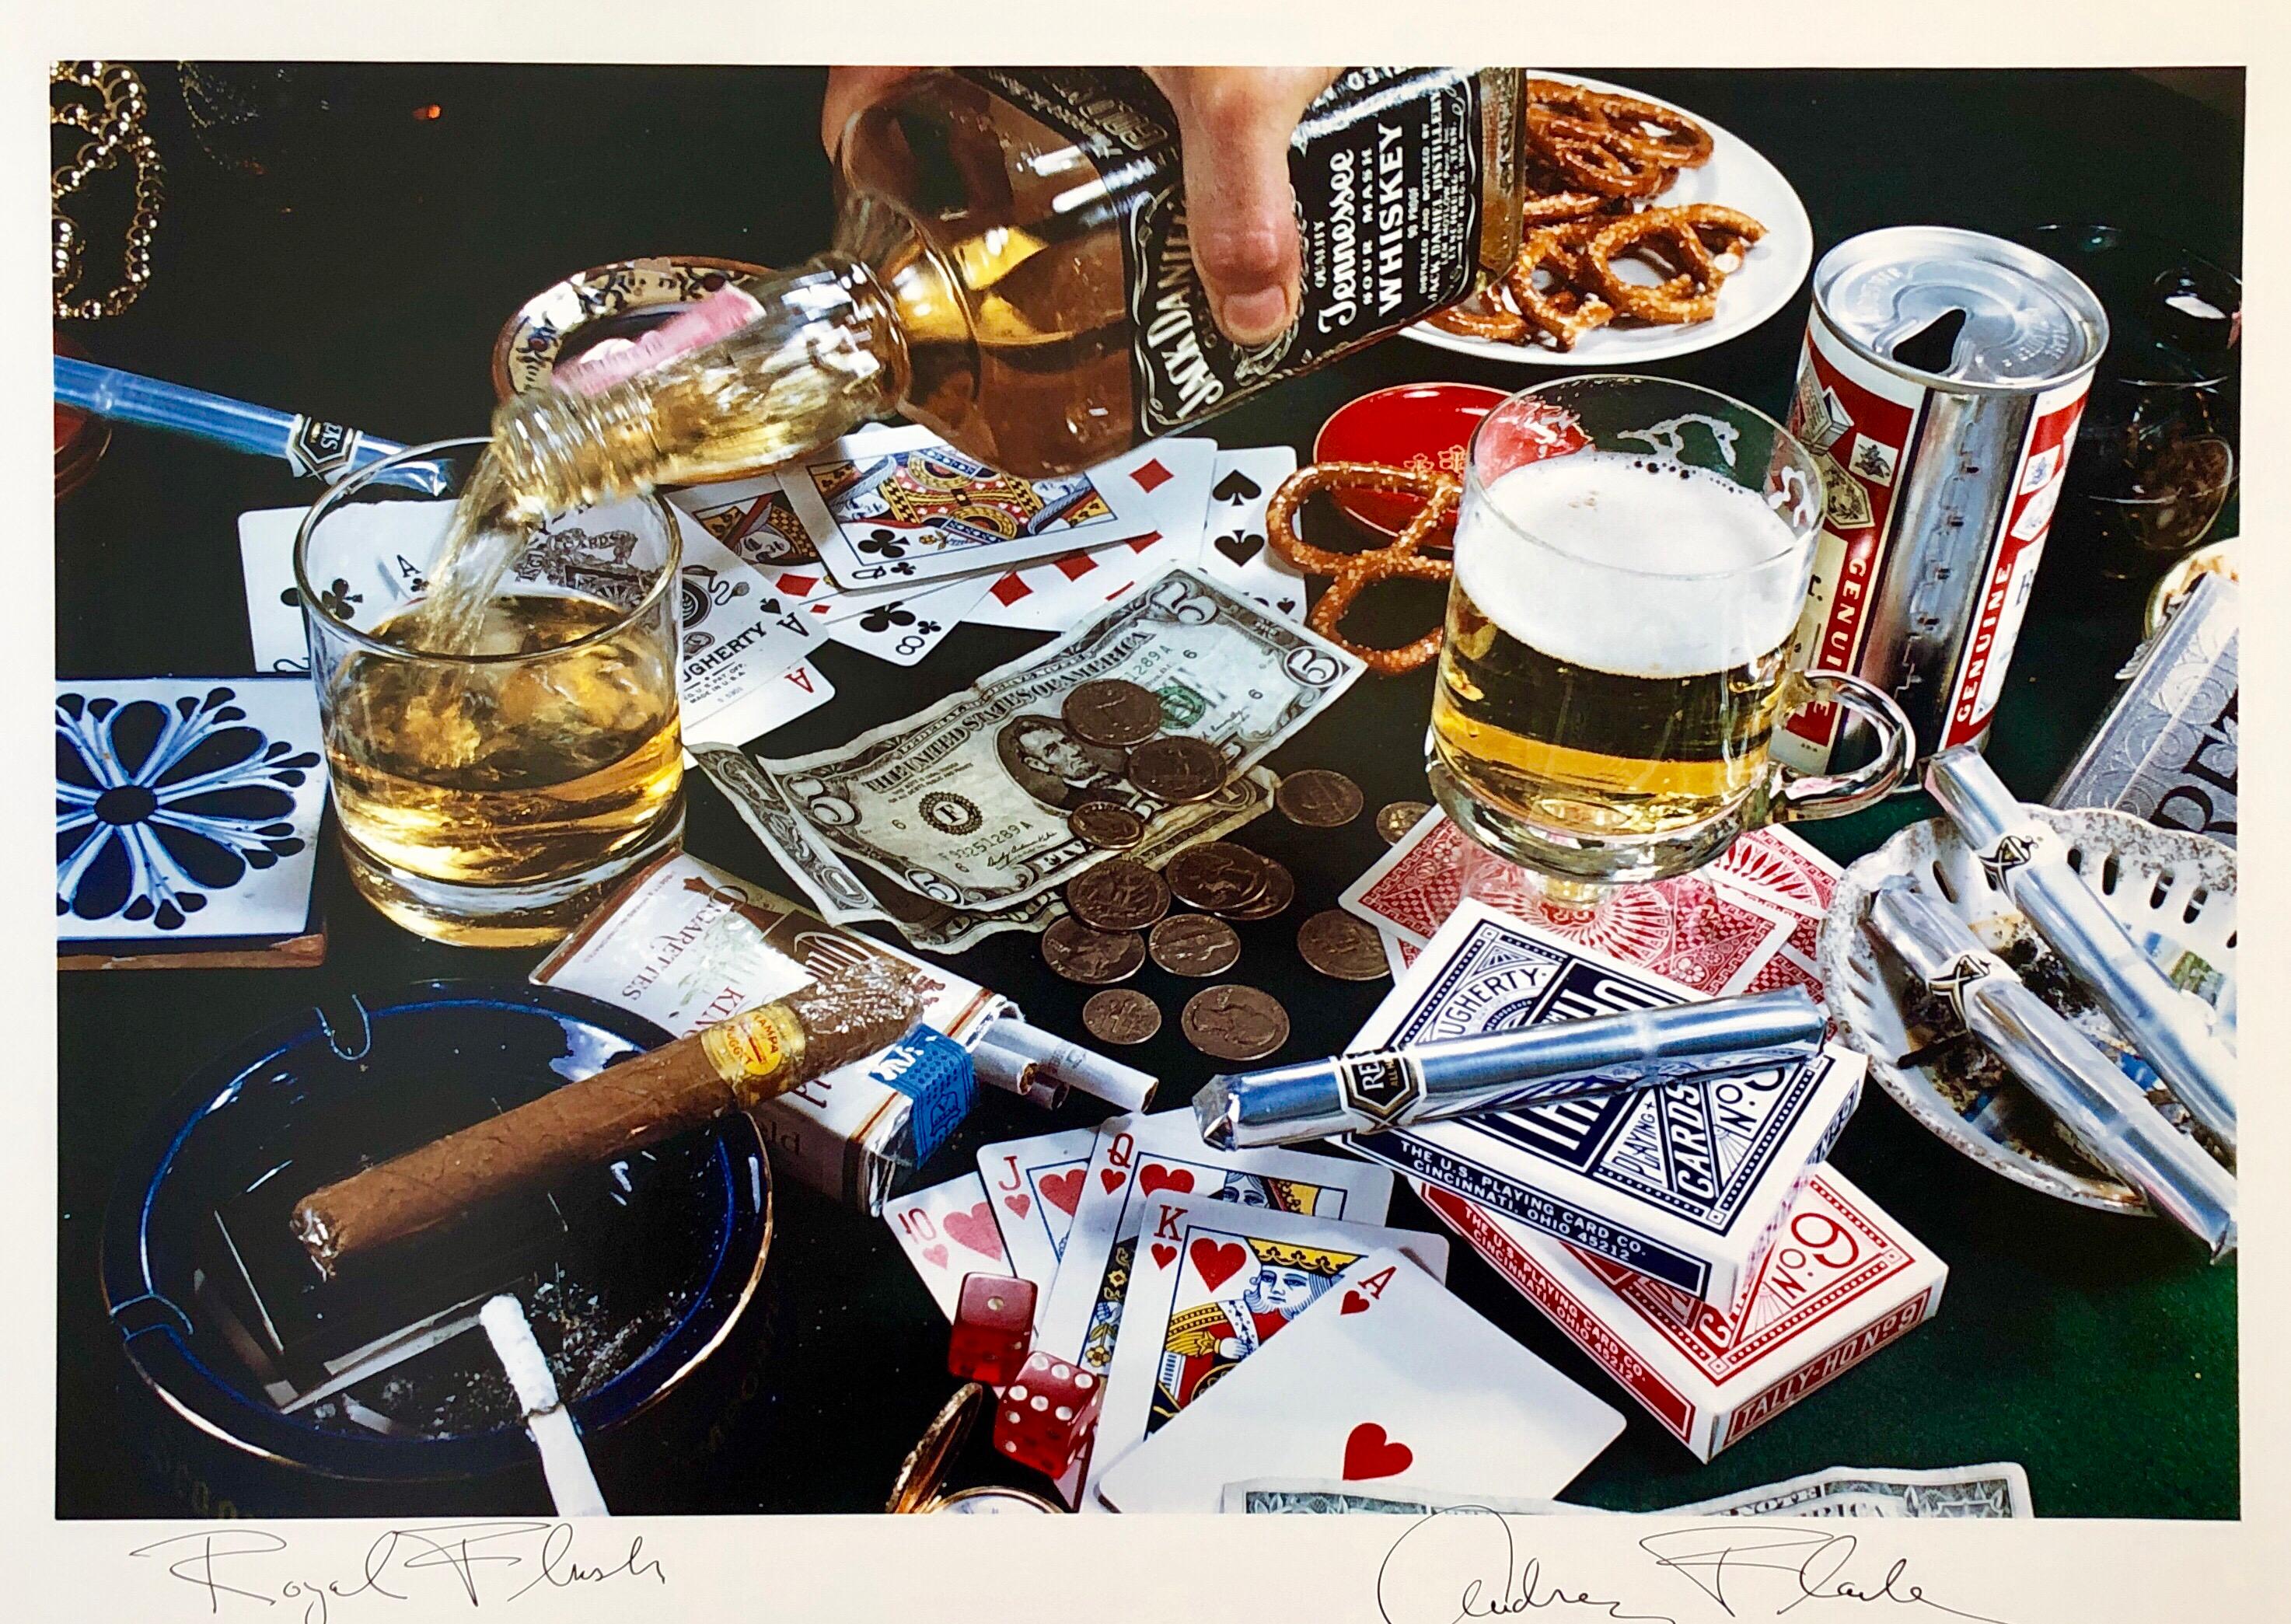 Hand signed and titled in ink by the artist from edition of 50 (plus proofs). Color Photo printed at CVI Lab by master printer Guy Stricherz. Published by Prestige Art Ltd. From the color saturated 1980's. Royal Flush, cigars, Jack Daniels Whiskey,